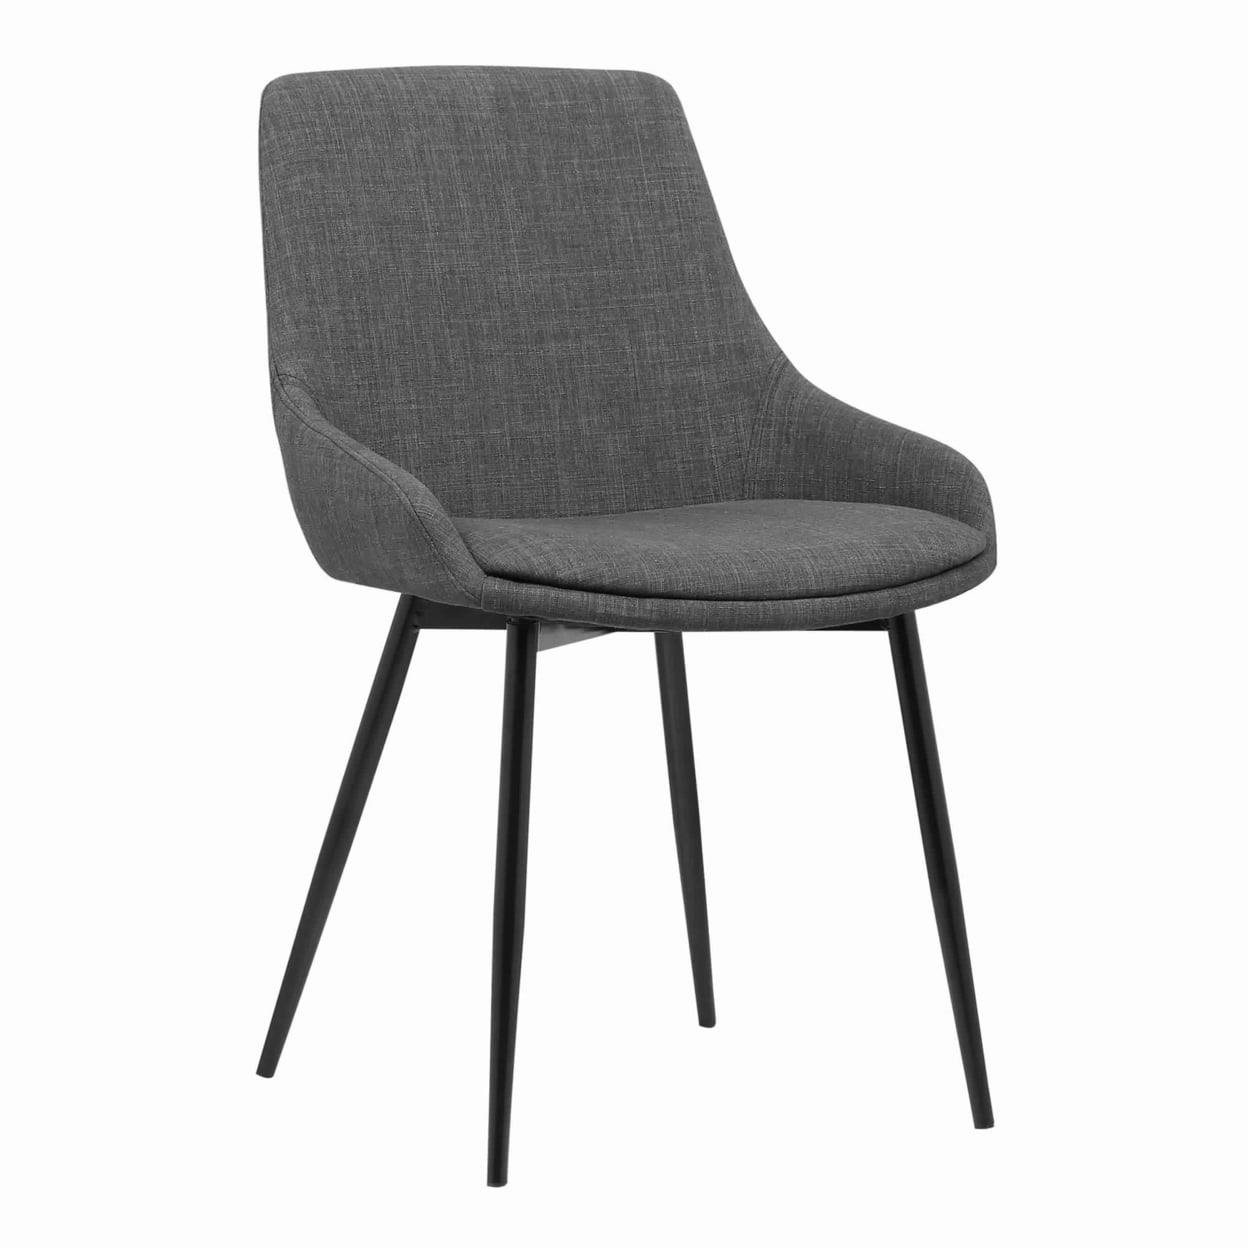 Elegant Gray Fabric Upholstered Side Chair with Black Metal Legs